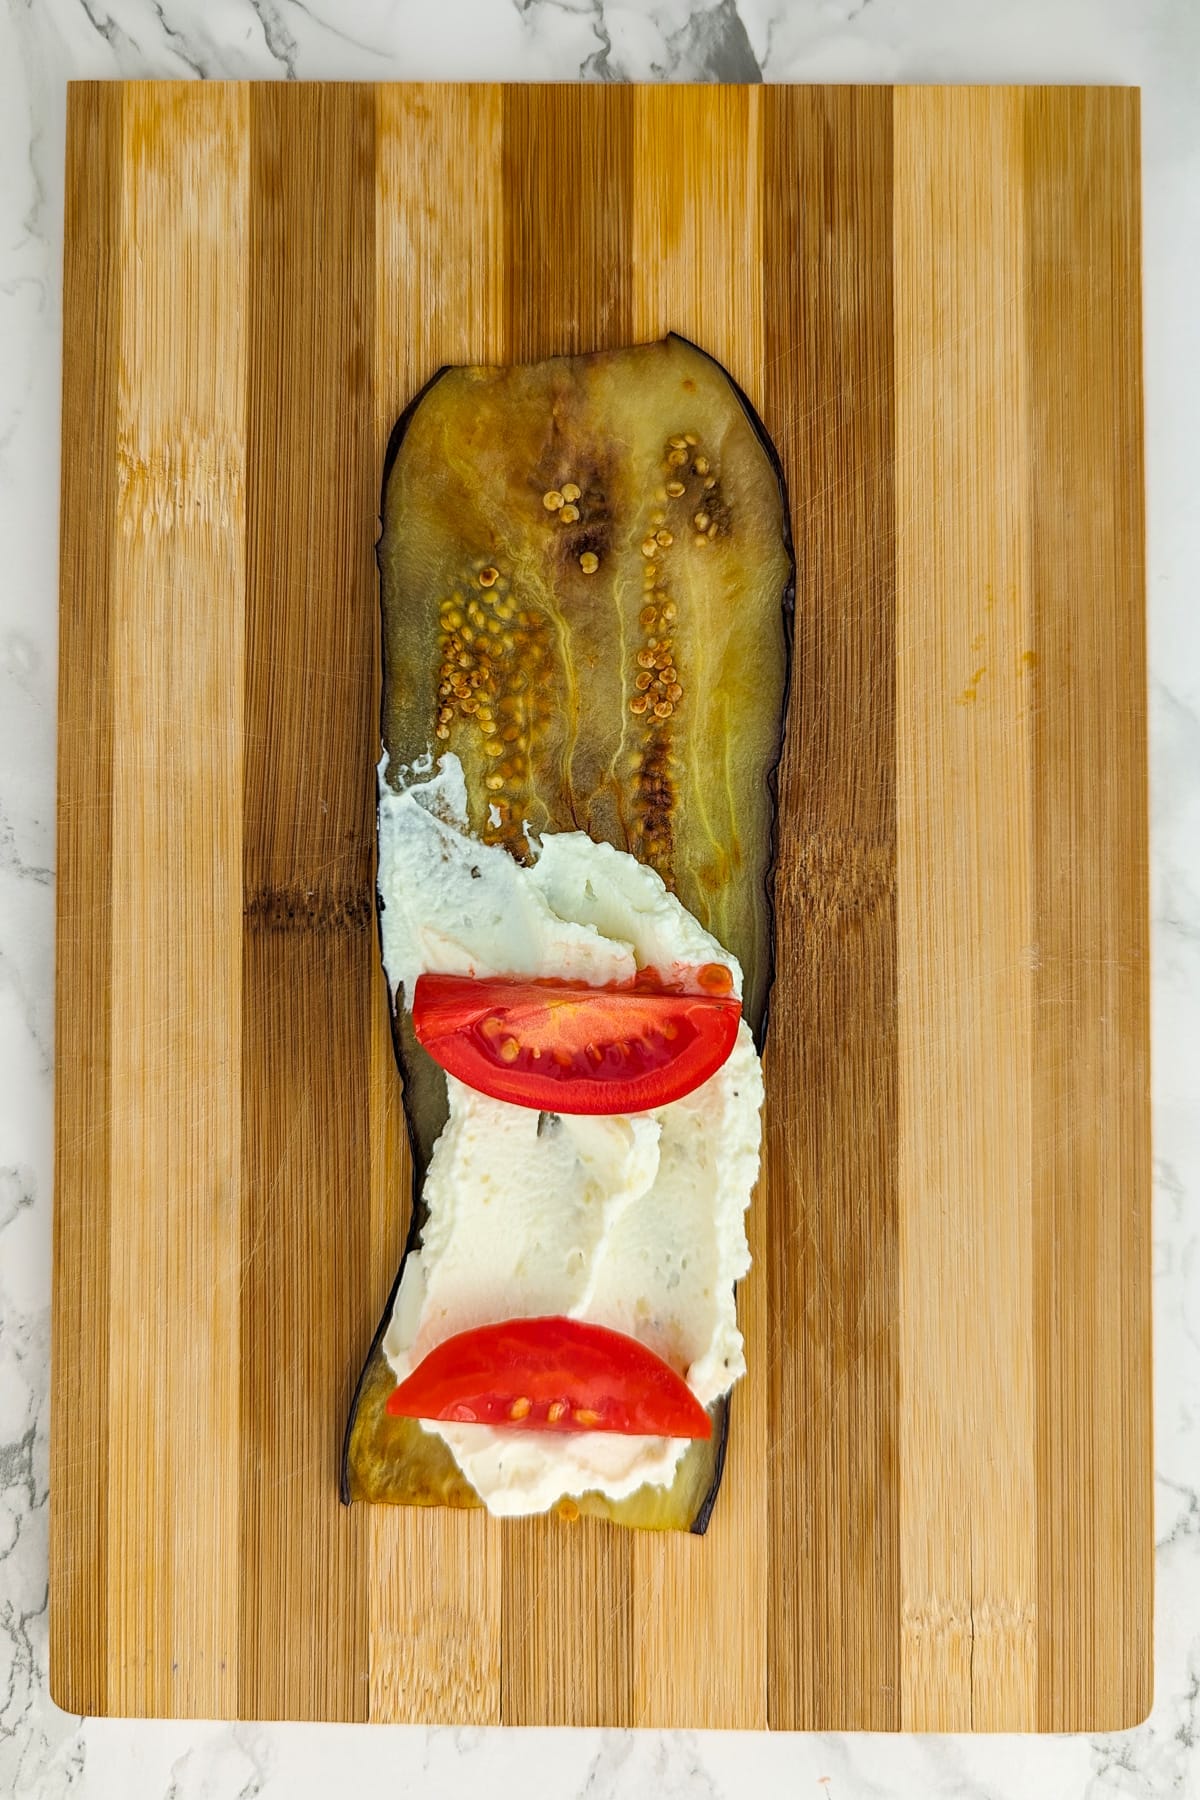 A slice of roasted eggplant spreaded with cream cheese and two tomato slices.